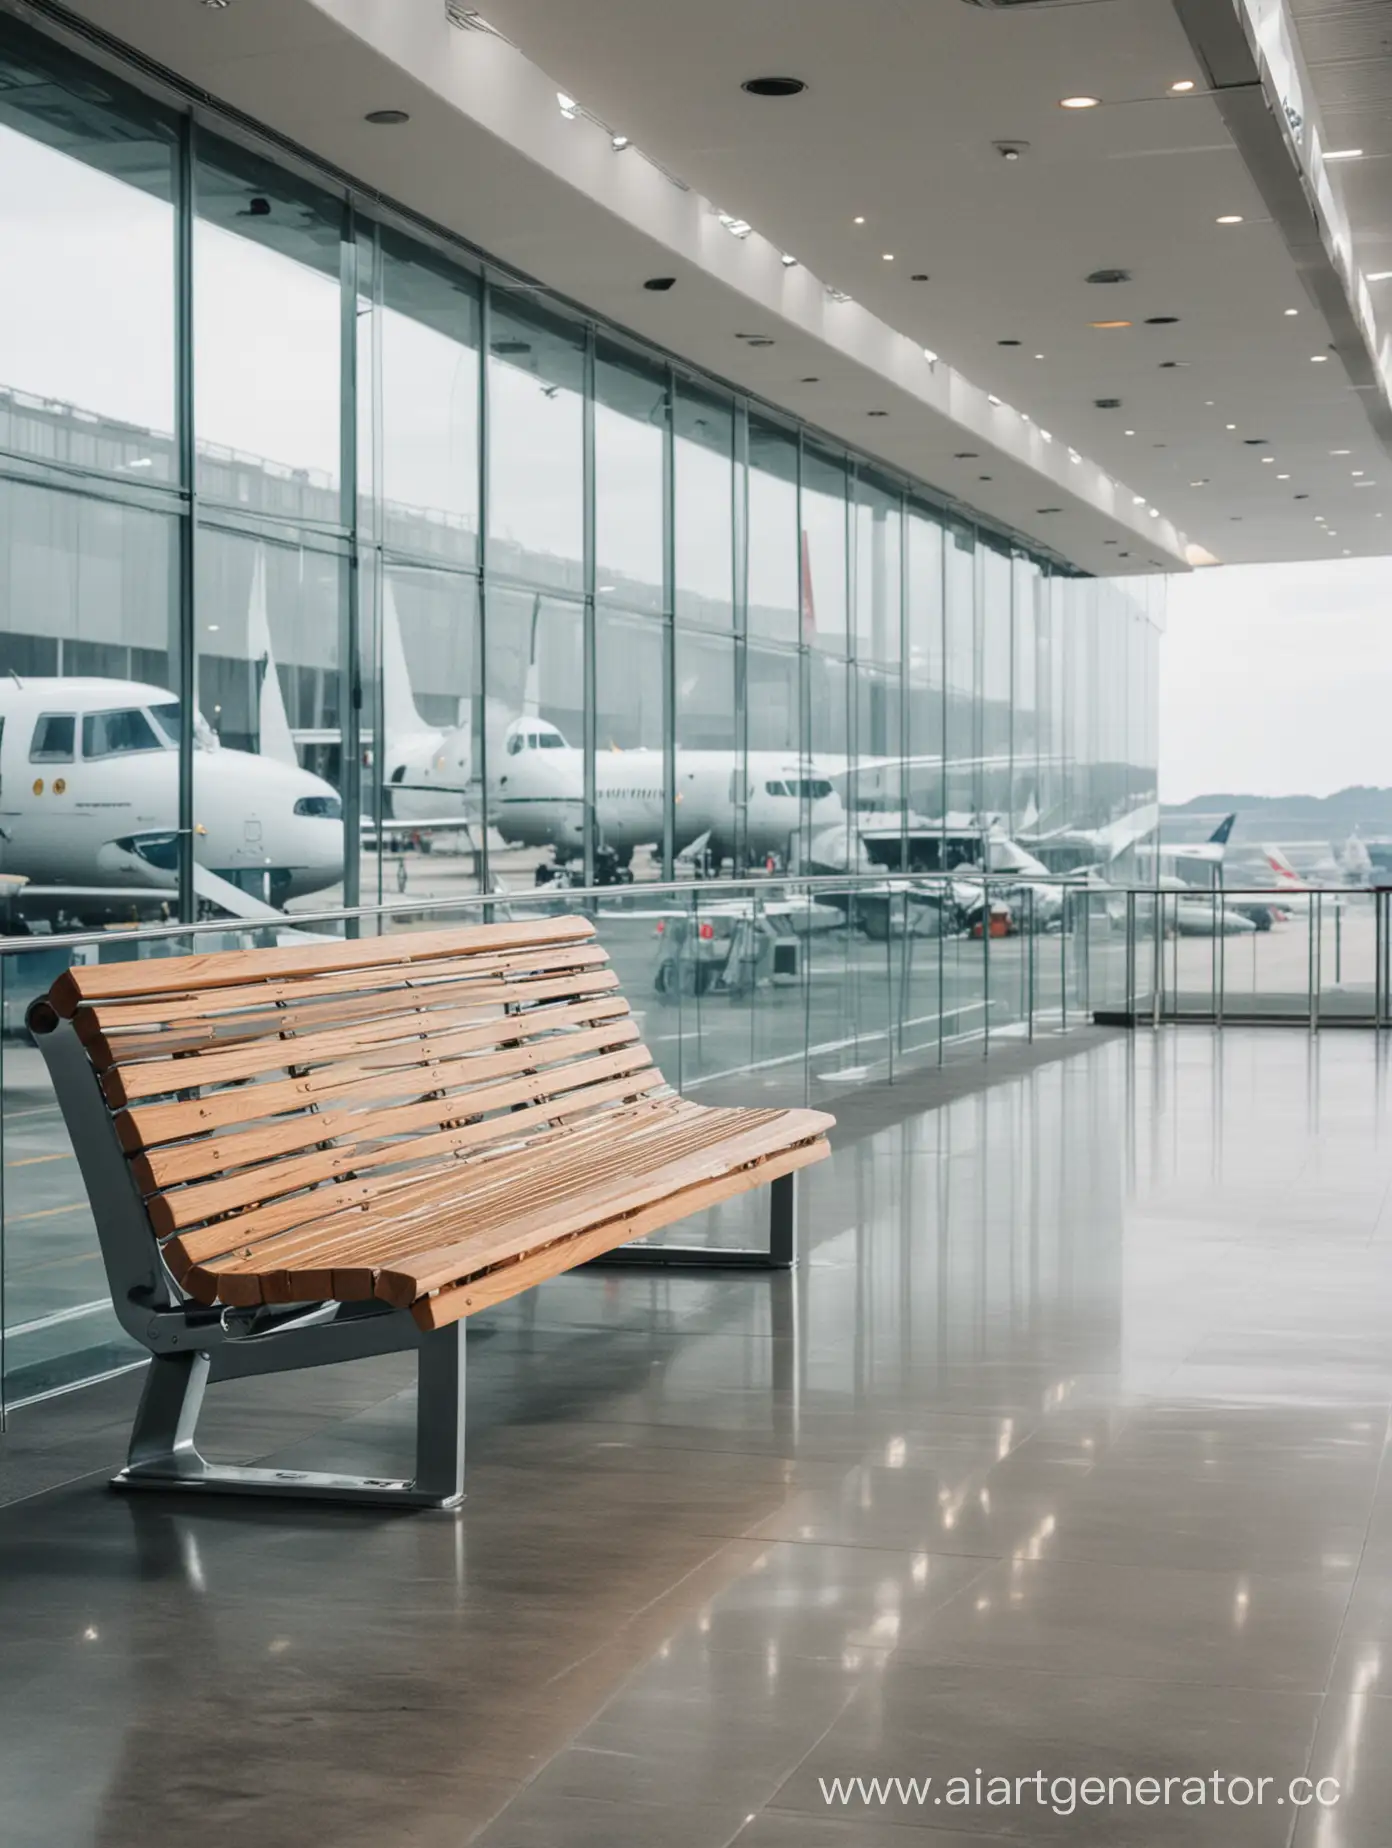 Airport-Bench-with-Transparent-Glass-View-of-Runway